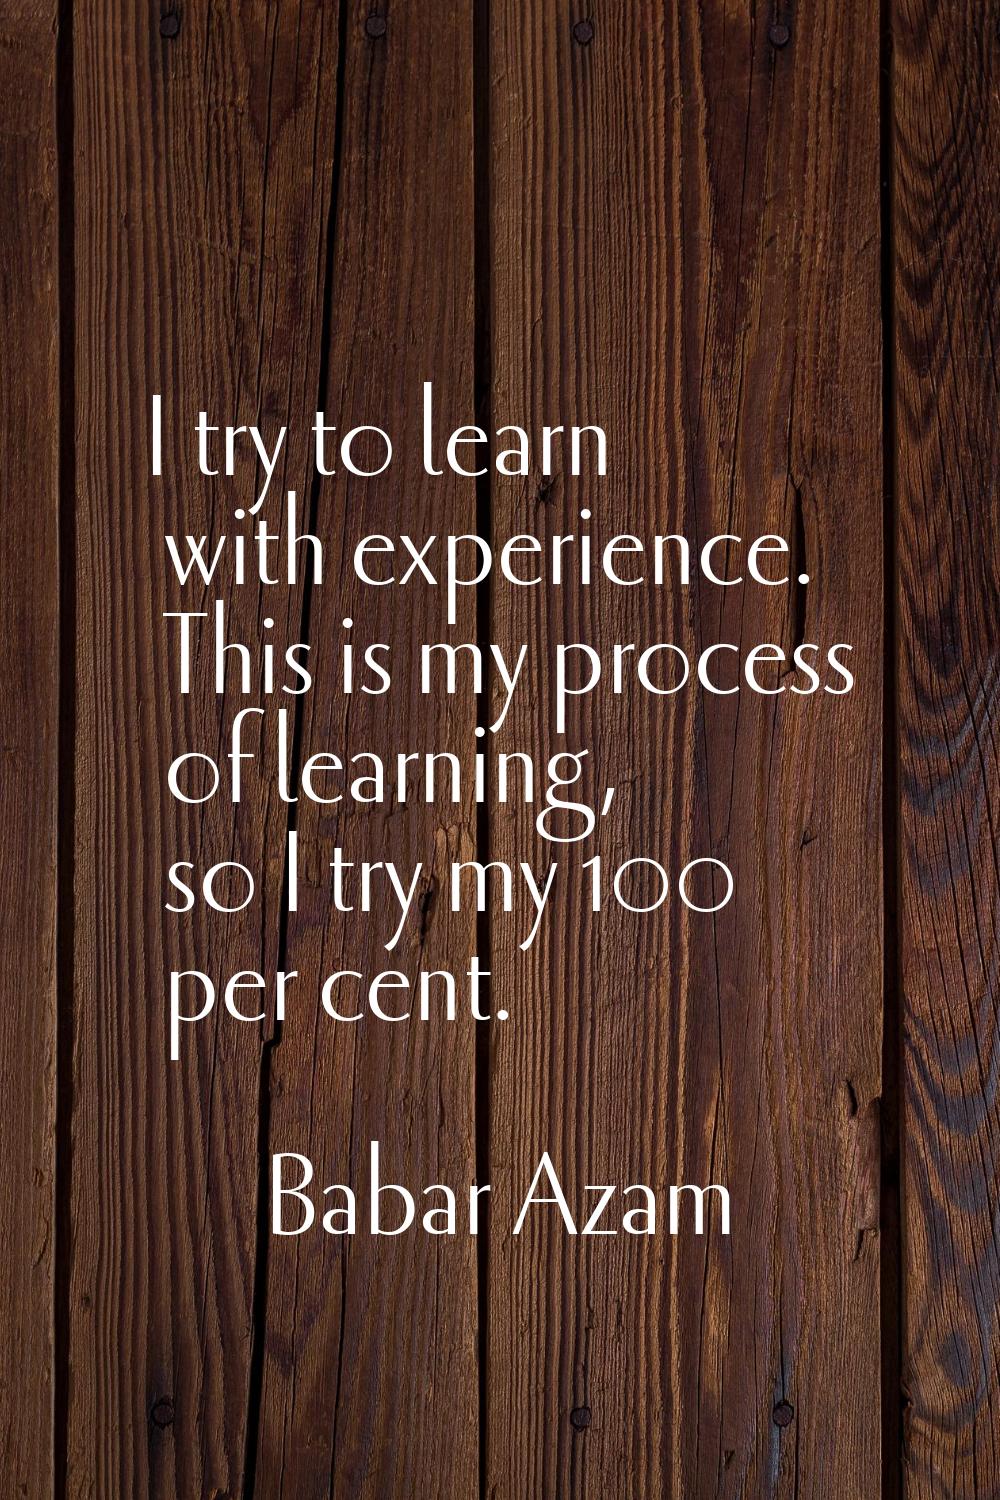 I try to learn with experience. This is my process of learning, so I try my 100 per cent.